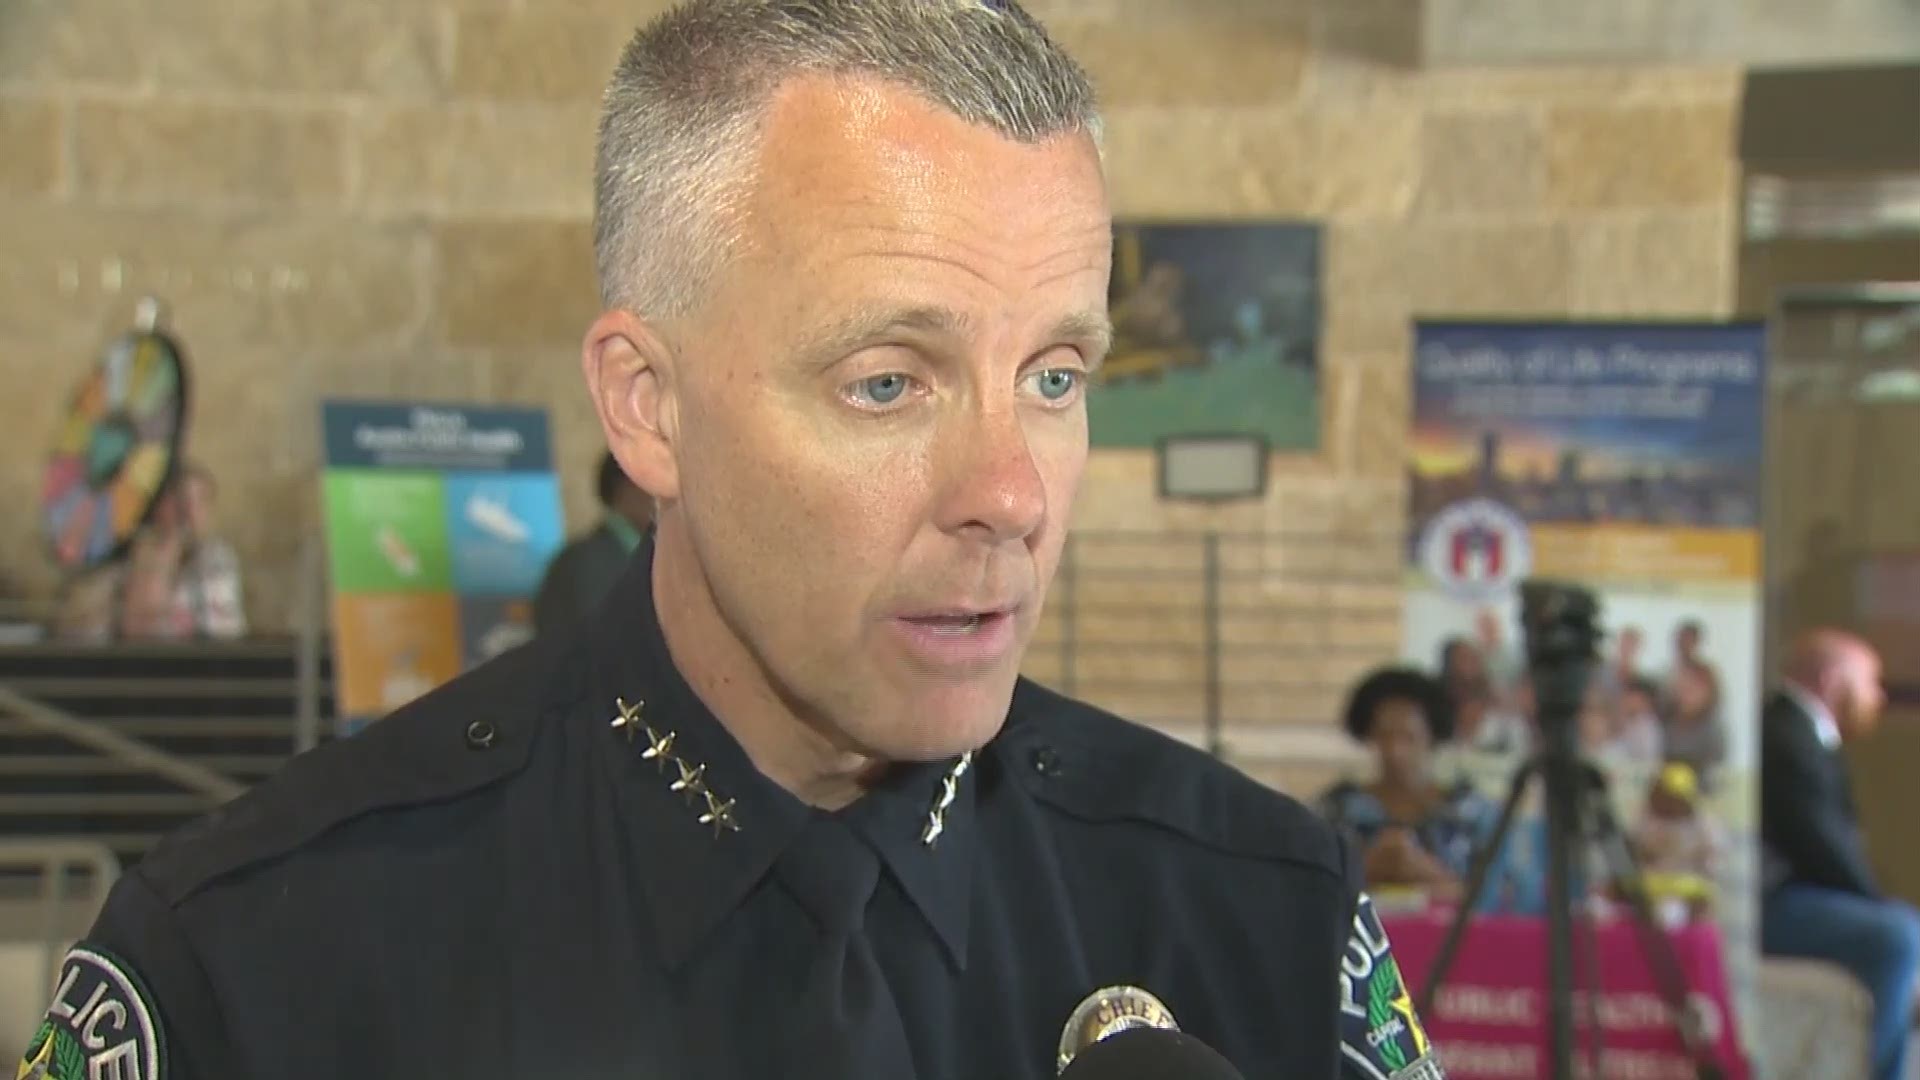 "In no way am I going to be sympathetic toward someone who murdered people in our community," APD Interim Police Chief Brian Manley said. "What my comments were were a reflection of what his comments were."